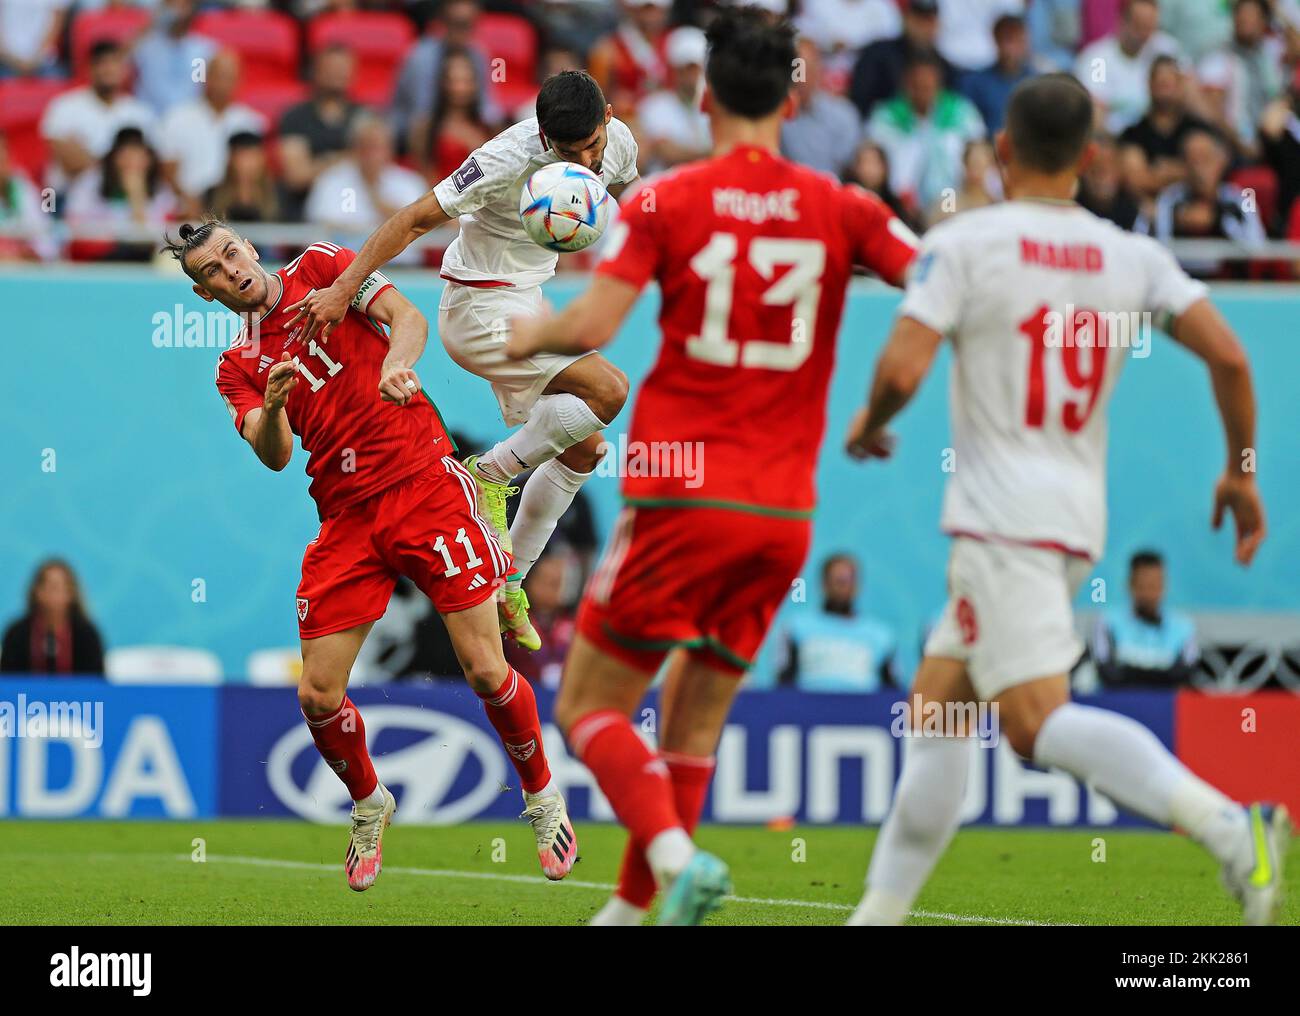 Doha, Qatar. 25th Nov, 2022. Gareth Bale of Wales disputes the bid with Milad Mohammadi of Iran, during the match between Wales and Iran, for the 2nd round of Group B of the FIFA World Cup Qatar 2022, Ahmed bin Ali Stadium this Friday 25. 30761 (Heuler Andrey/SPP) Credit: SPP Sport Press Photo. /Alamy Live News Stock Photo